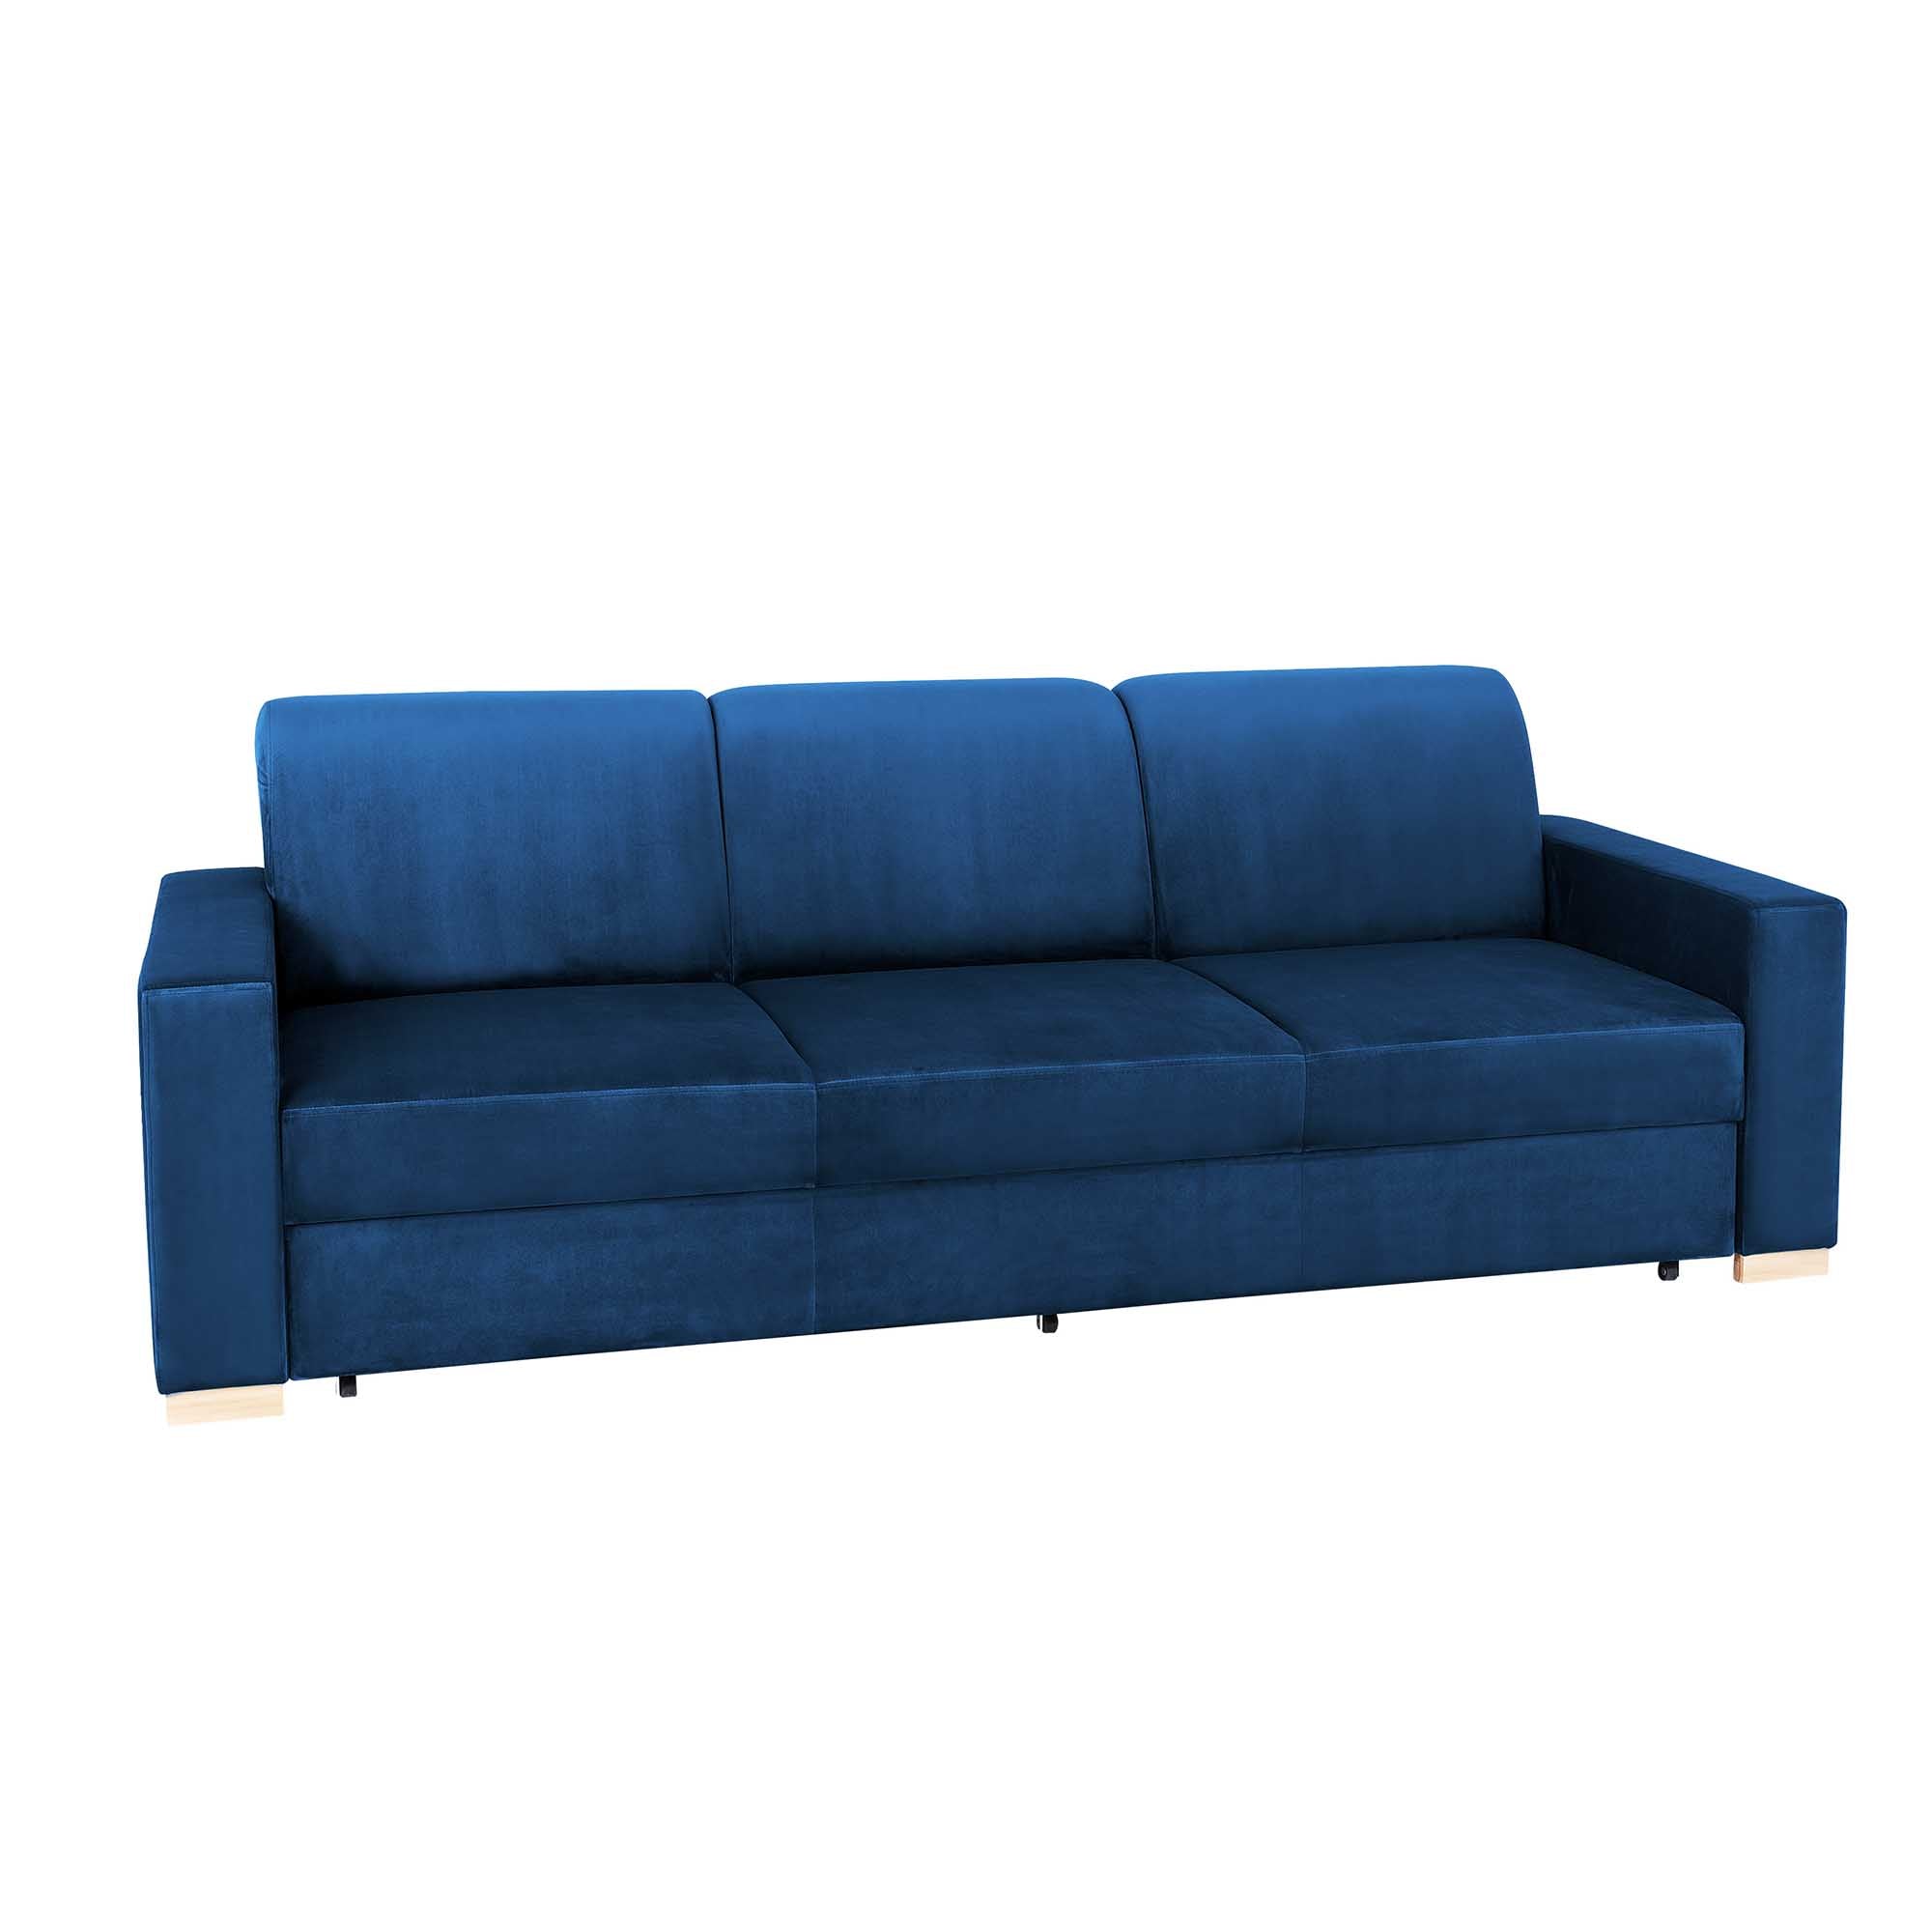 STABLE Sofa 3 Seaters upholstery colour blue